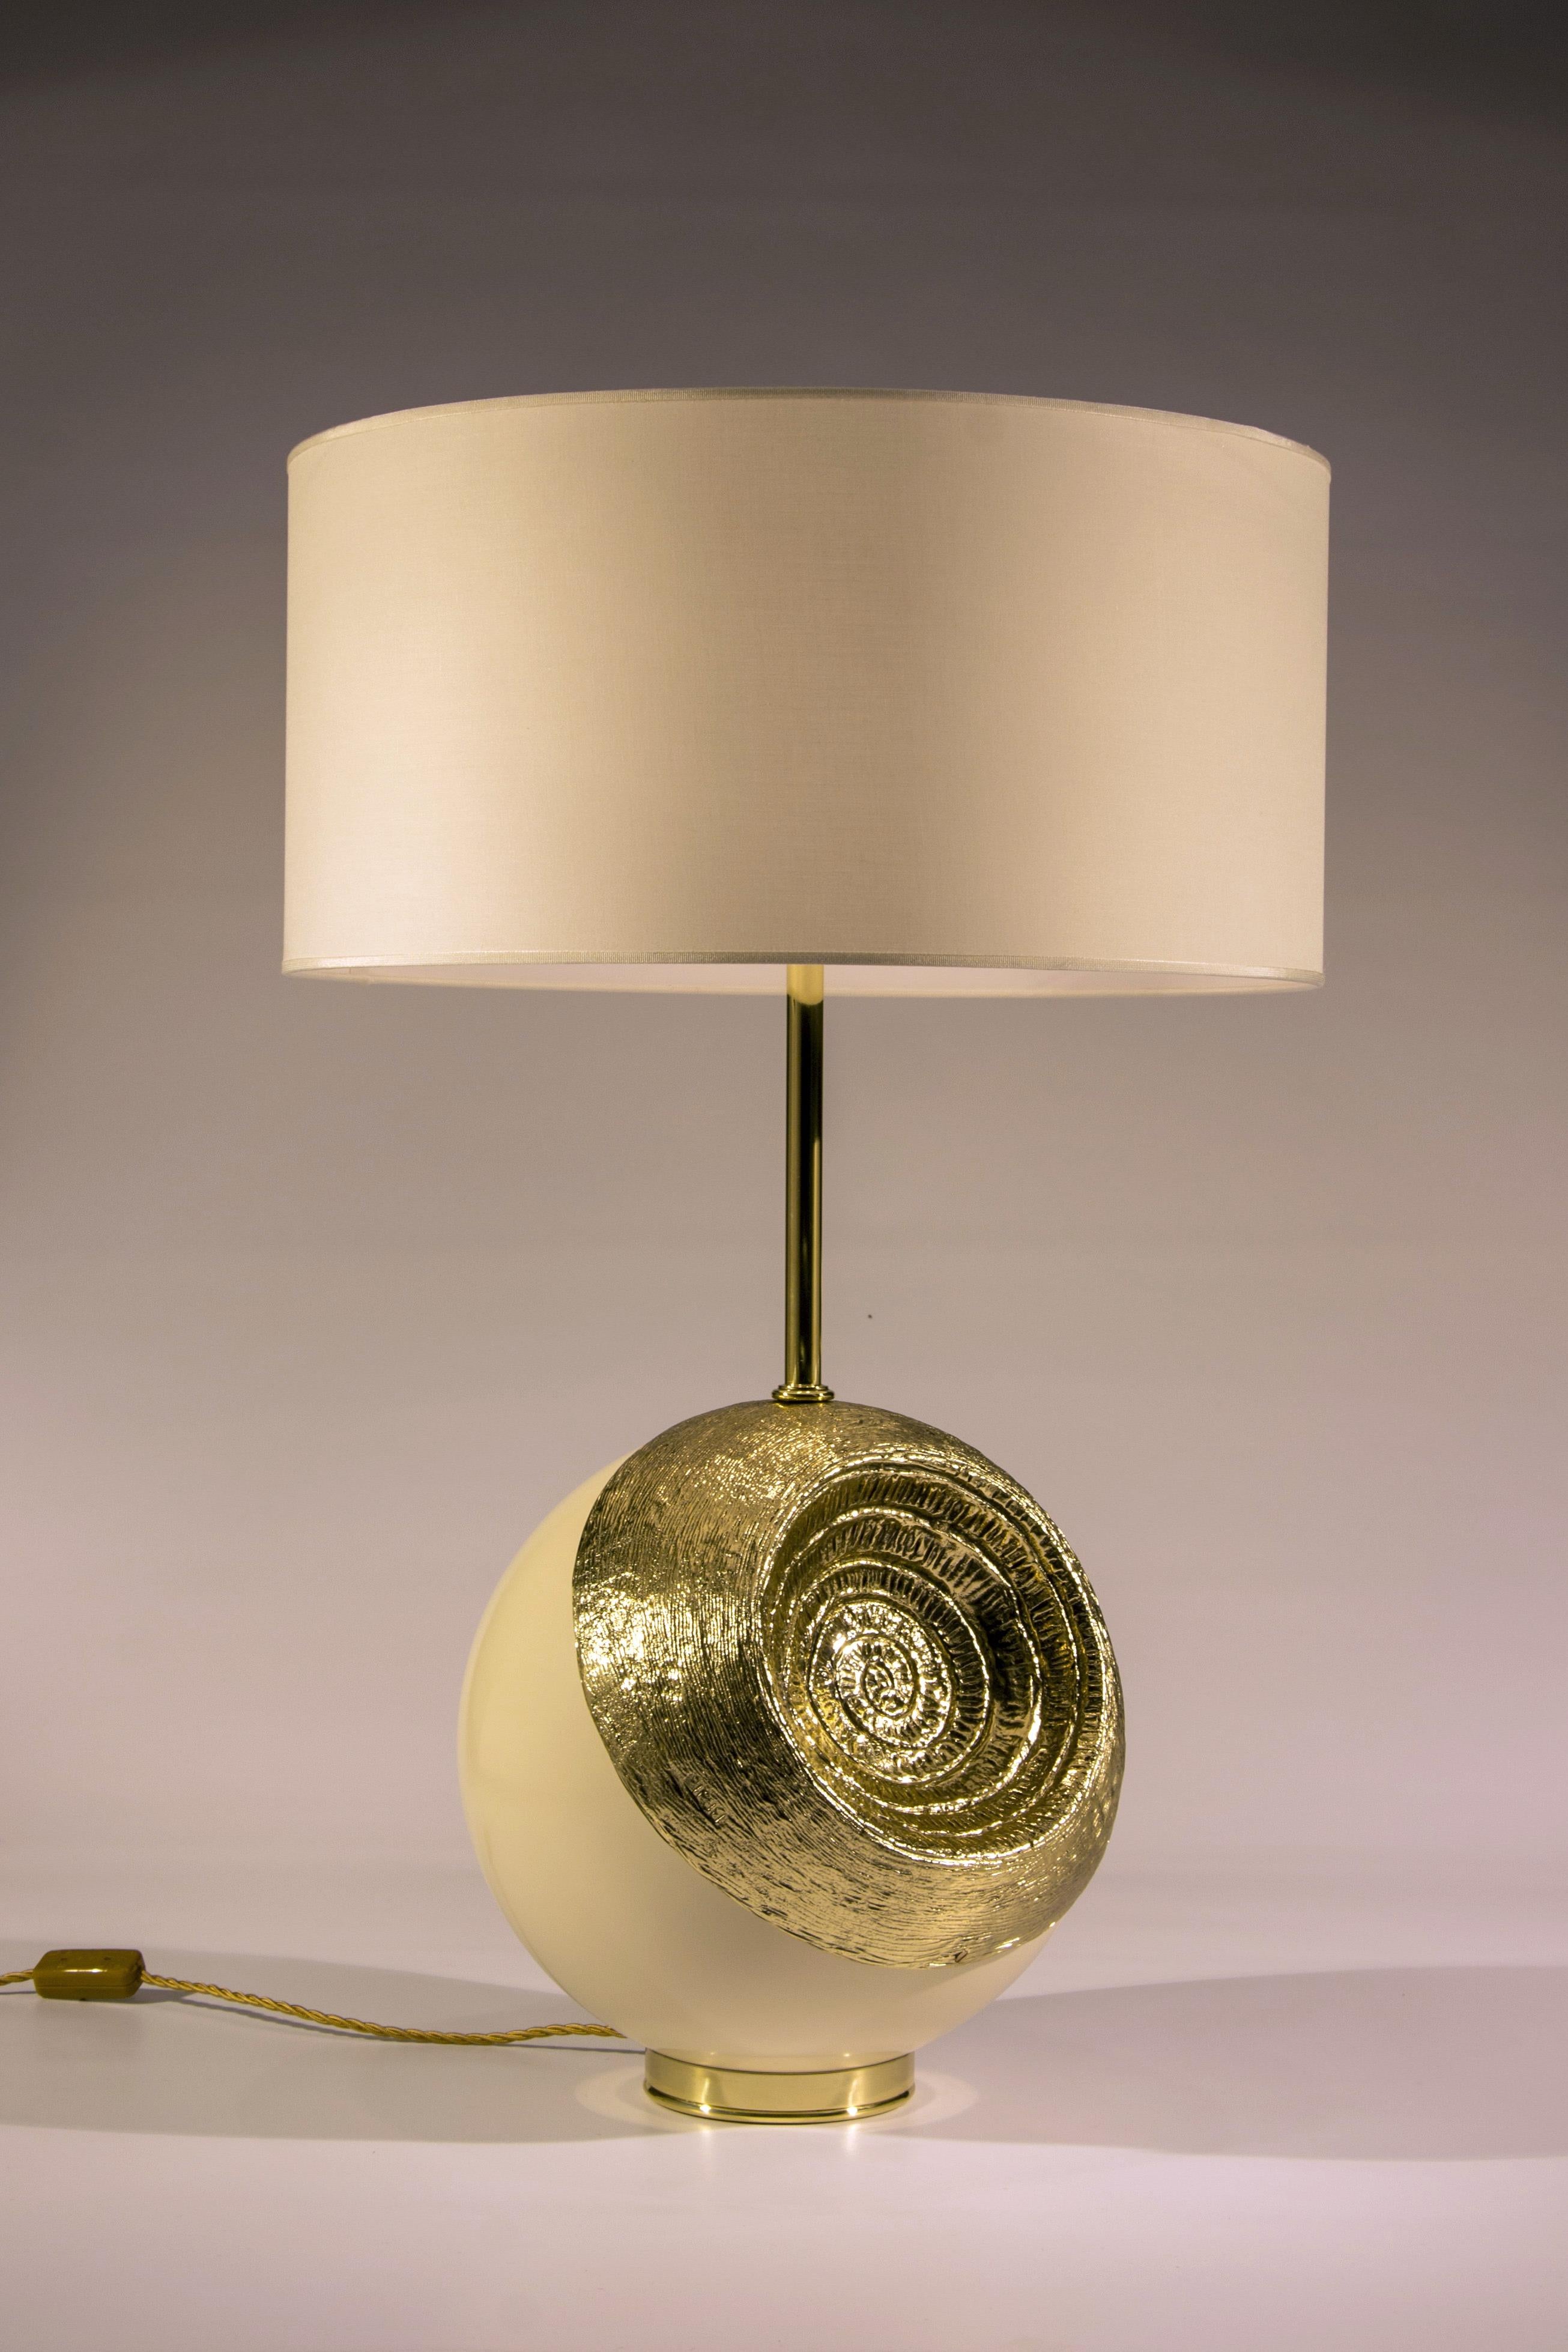 Lamp with important sculpture base in artistic brass casting. Originally the sphere at the base was conceived by Angelo Brotto in 1977 as a table sculpture. The rear part of the sphere is available in the brass version (as in the photo) and in the